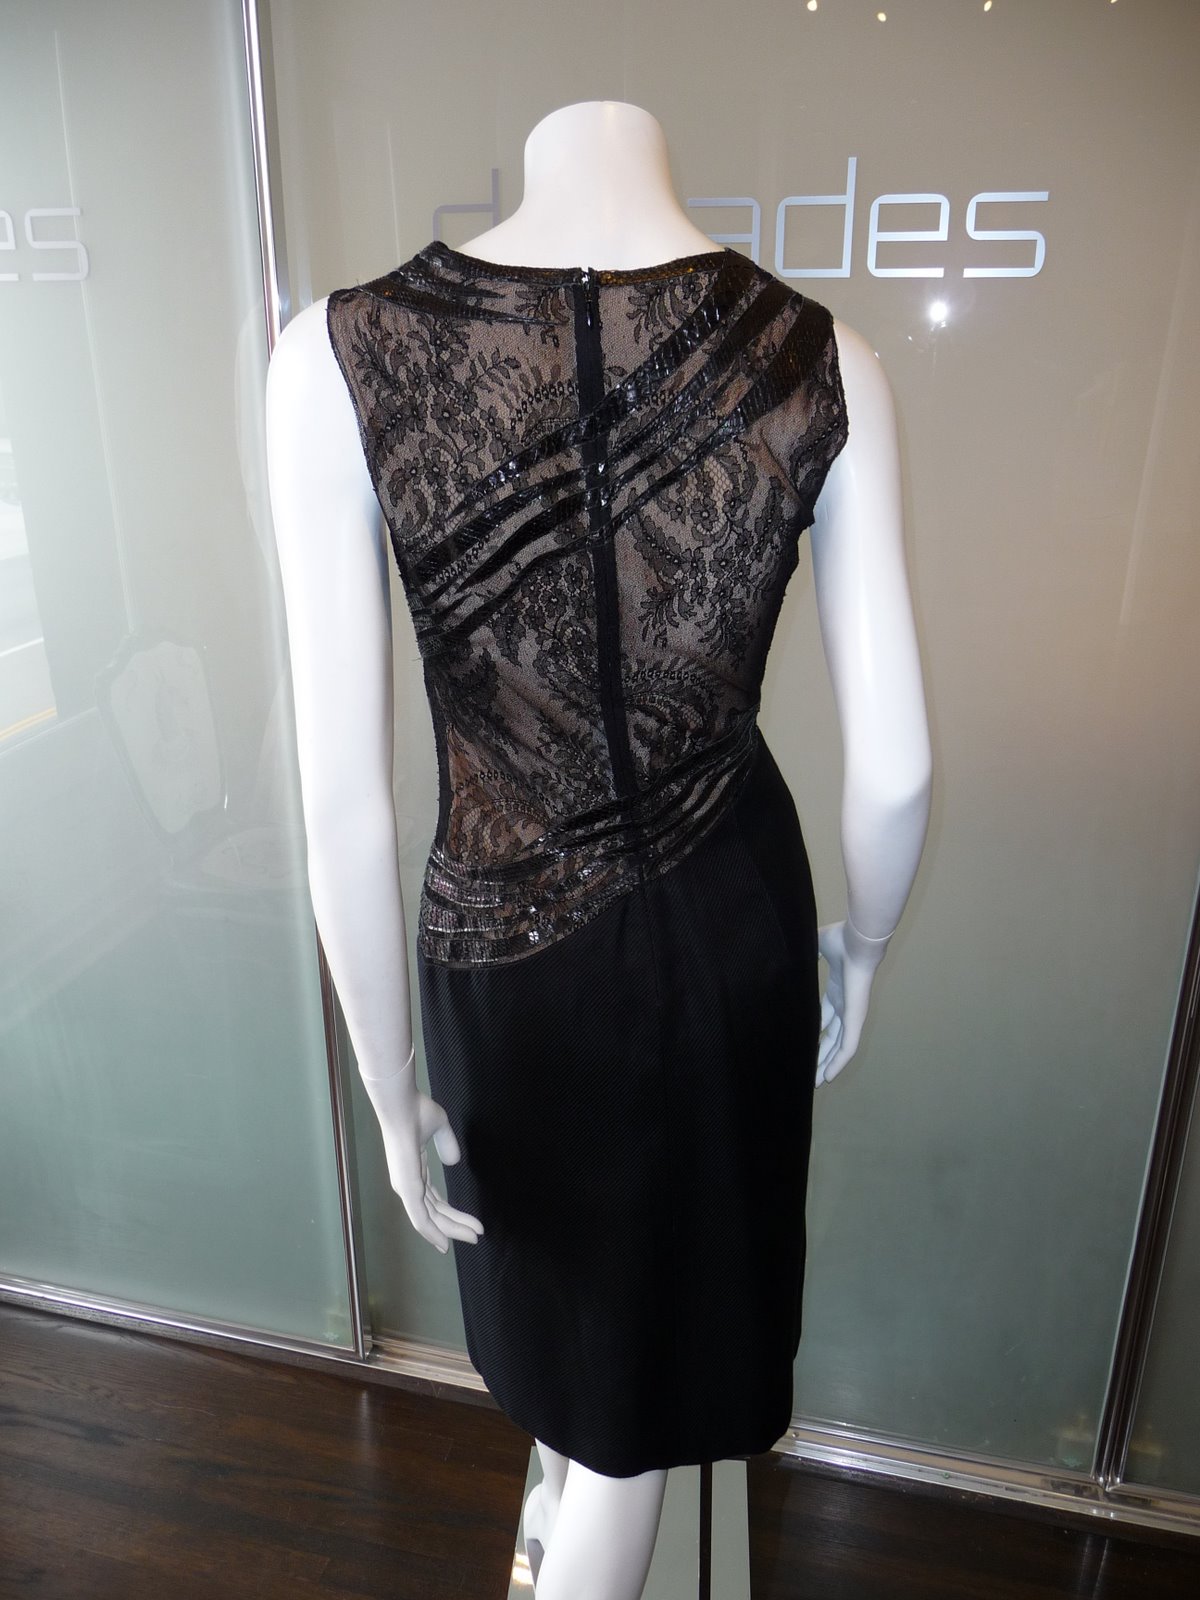 [GIANNI+VERSACE+WHIP+SNAKE+WITH+LACE+OVER+NUDE+CHIFFON+WITH+BIAS+CUT+SILK+C+MID+90S.JPG+(3).JPG]